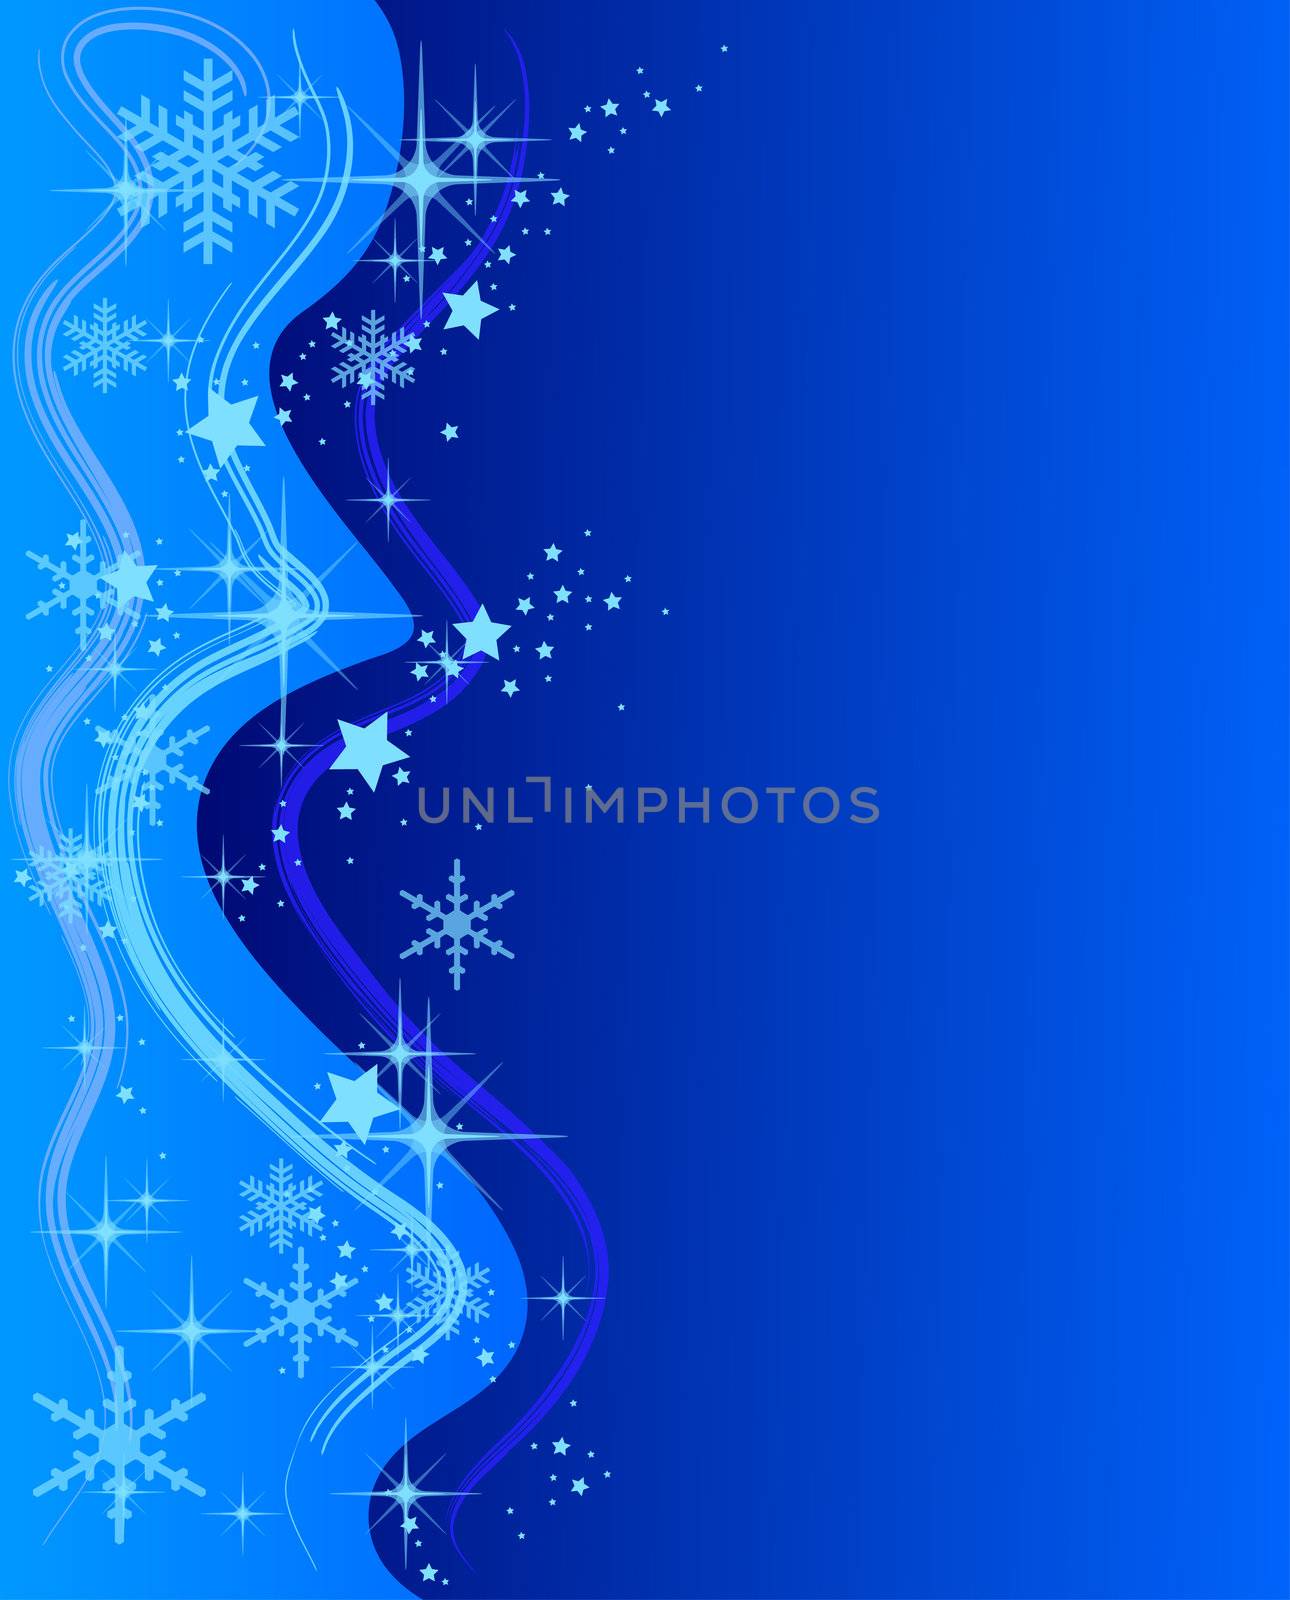 Illustration of a blue Christmas Background with Stars by peromarketing